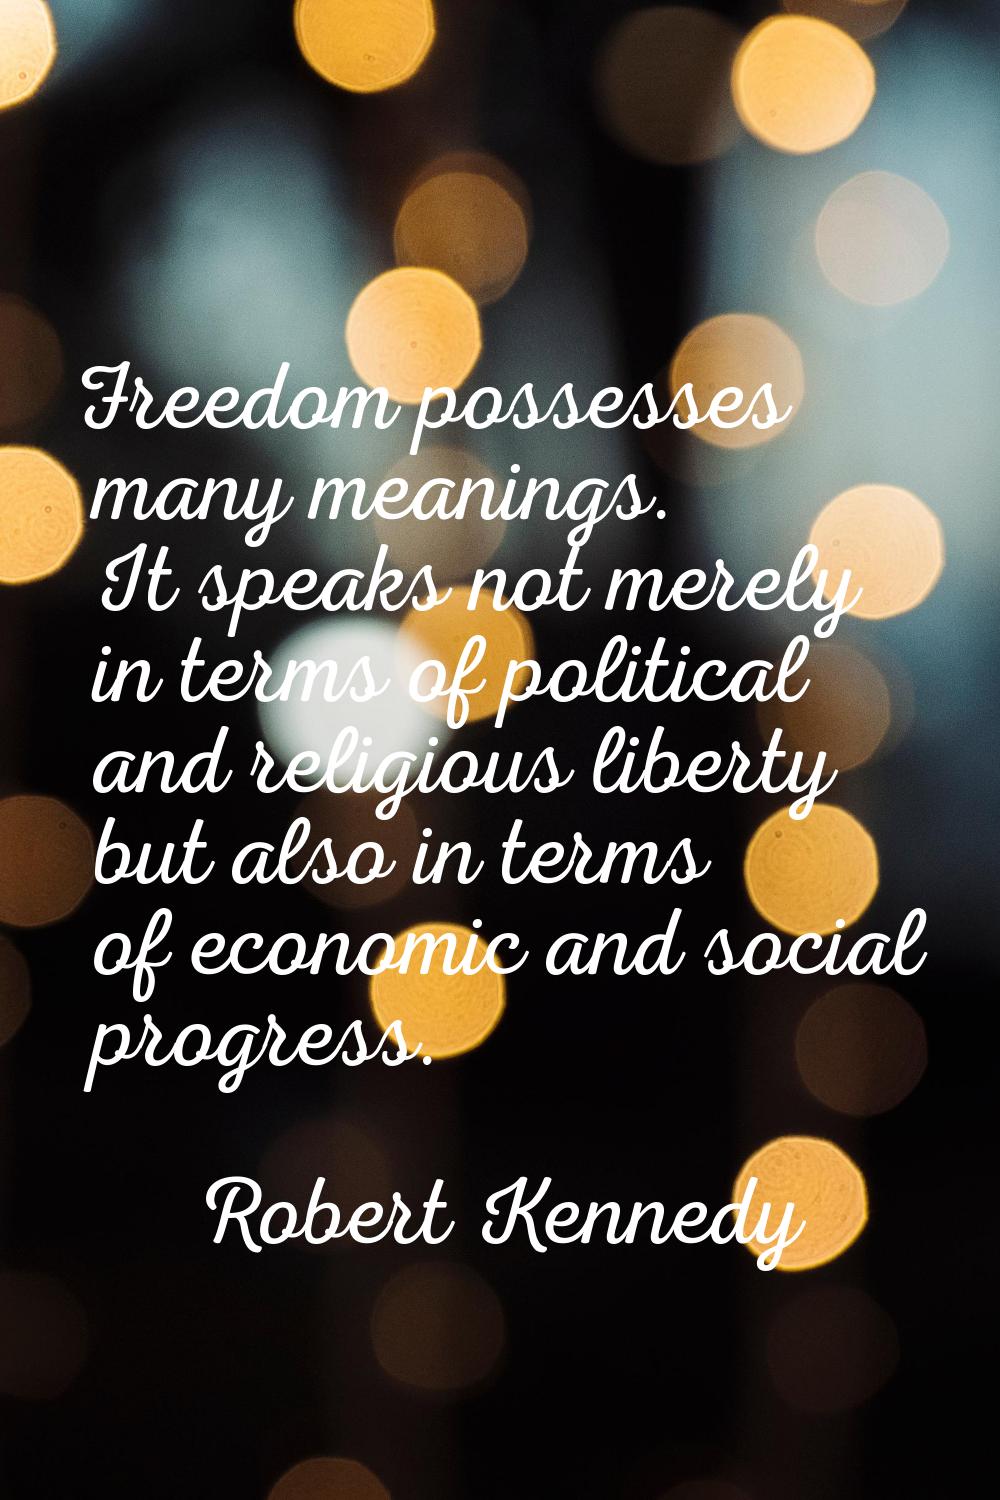 Freedom possesses many meanings. It speaks not merely in terms of political and religious liberty b